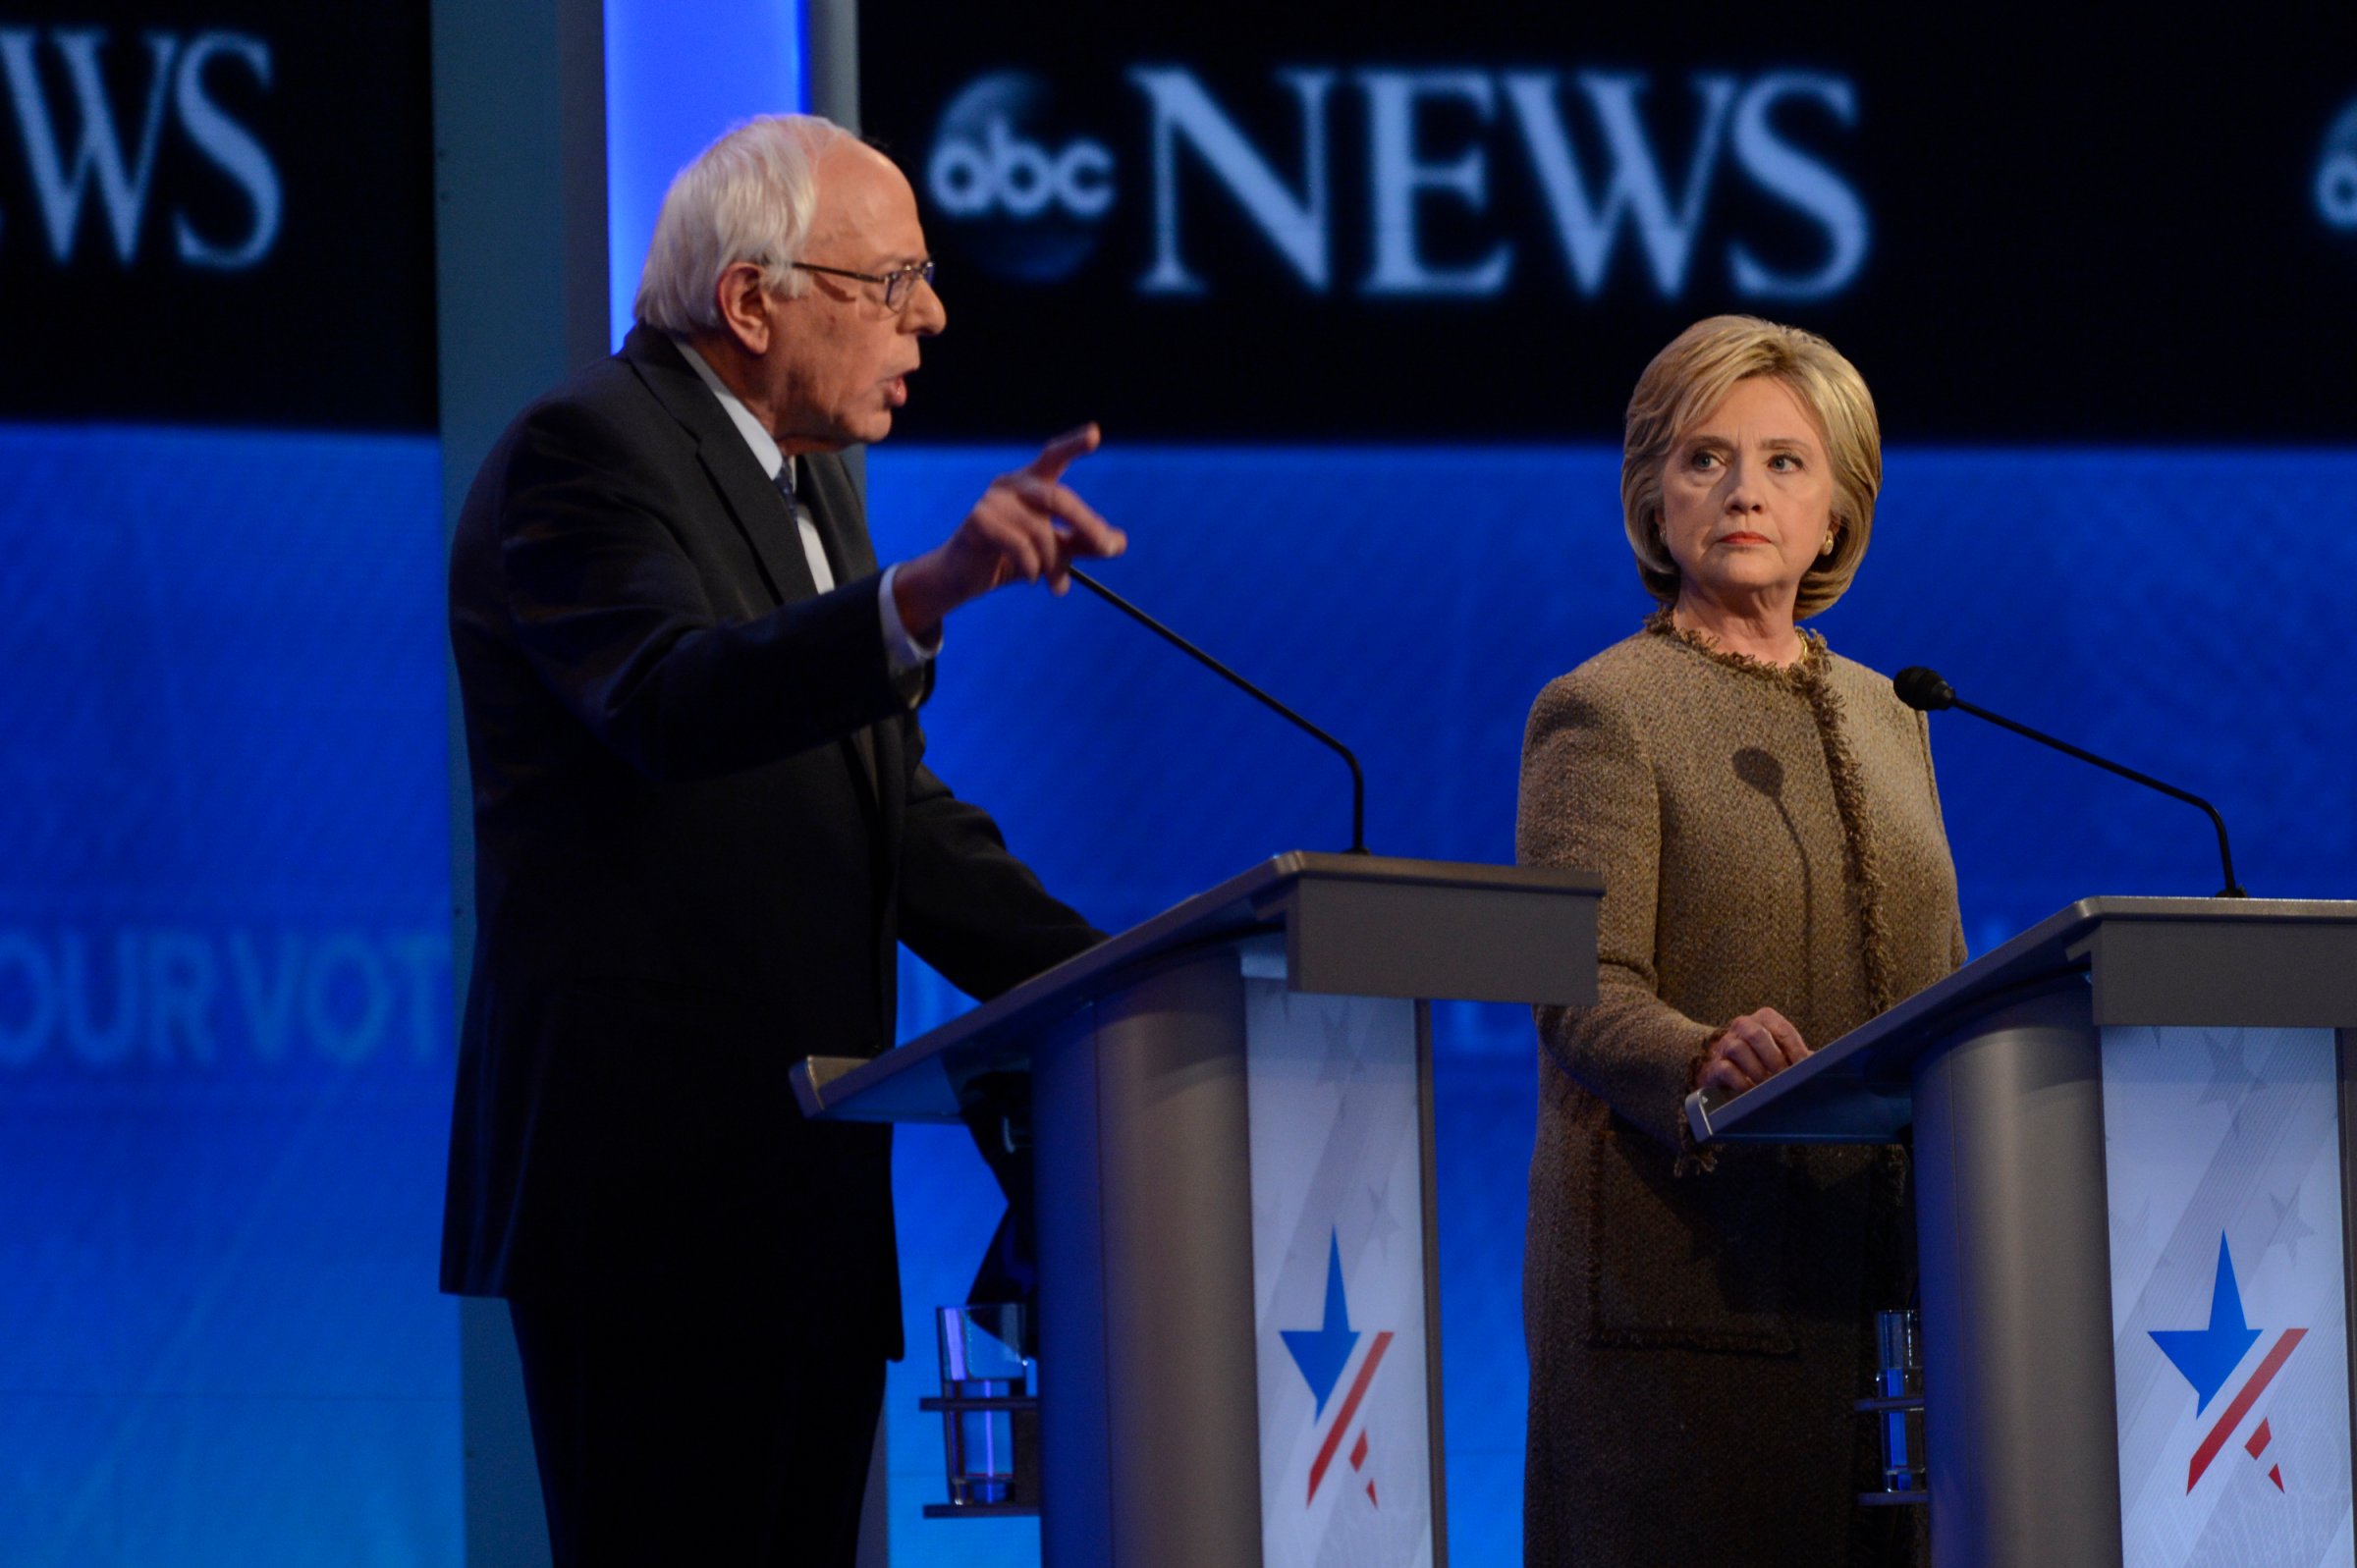 Hillary Clinton and Bernie Sanders at the Democratic Presidential debate at St. Anselm College in Manchester, NH on Dec. 19, 2015.